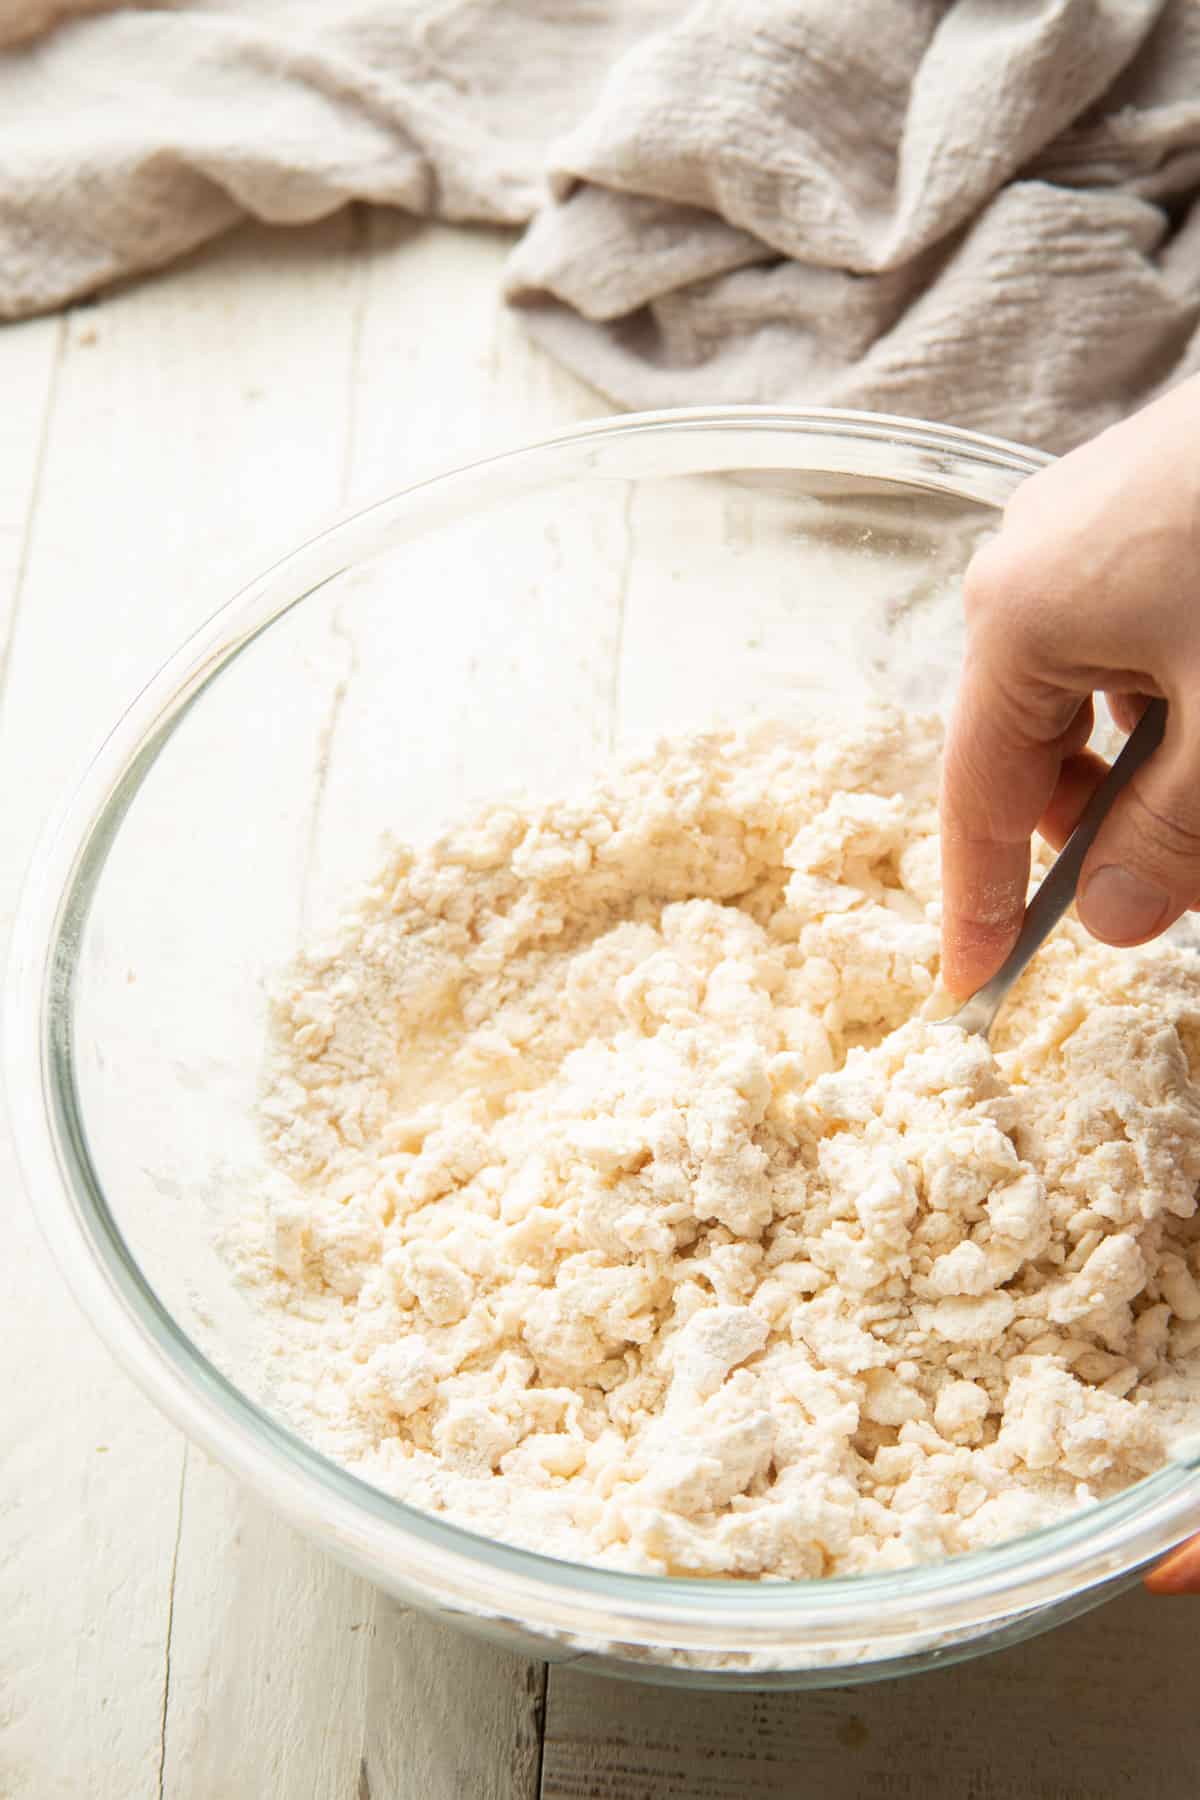 Hand stirring pastry dough together in a large bowl.